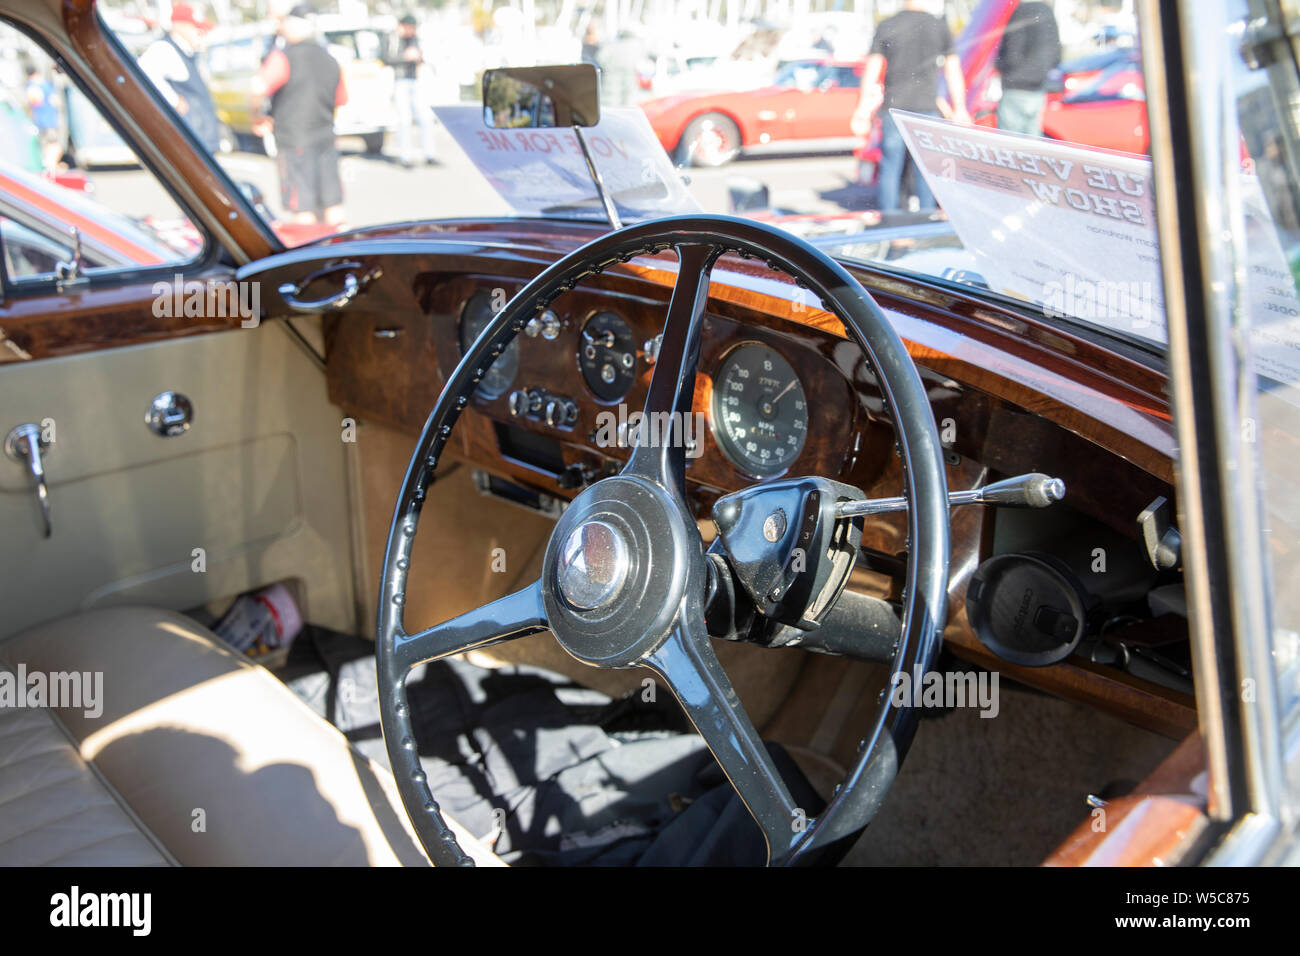 Bentley S1 motor car and interior photo of wooden dashboard and steering wheel, Sydney,Australia Stock Photo